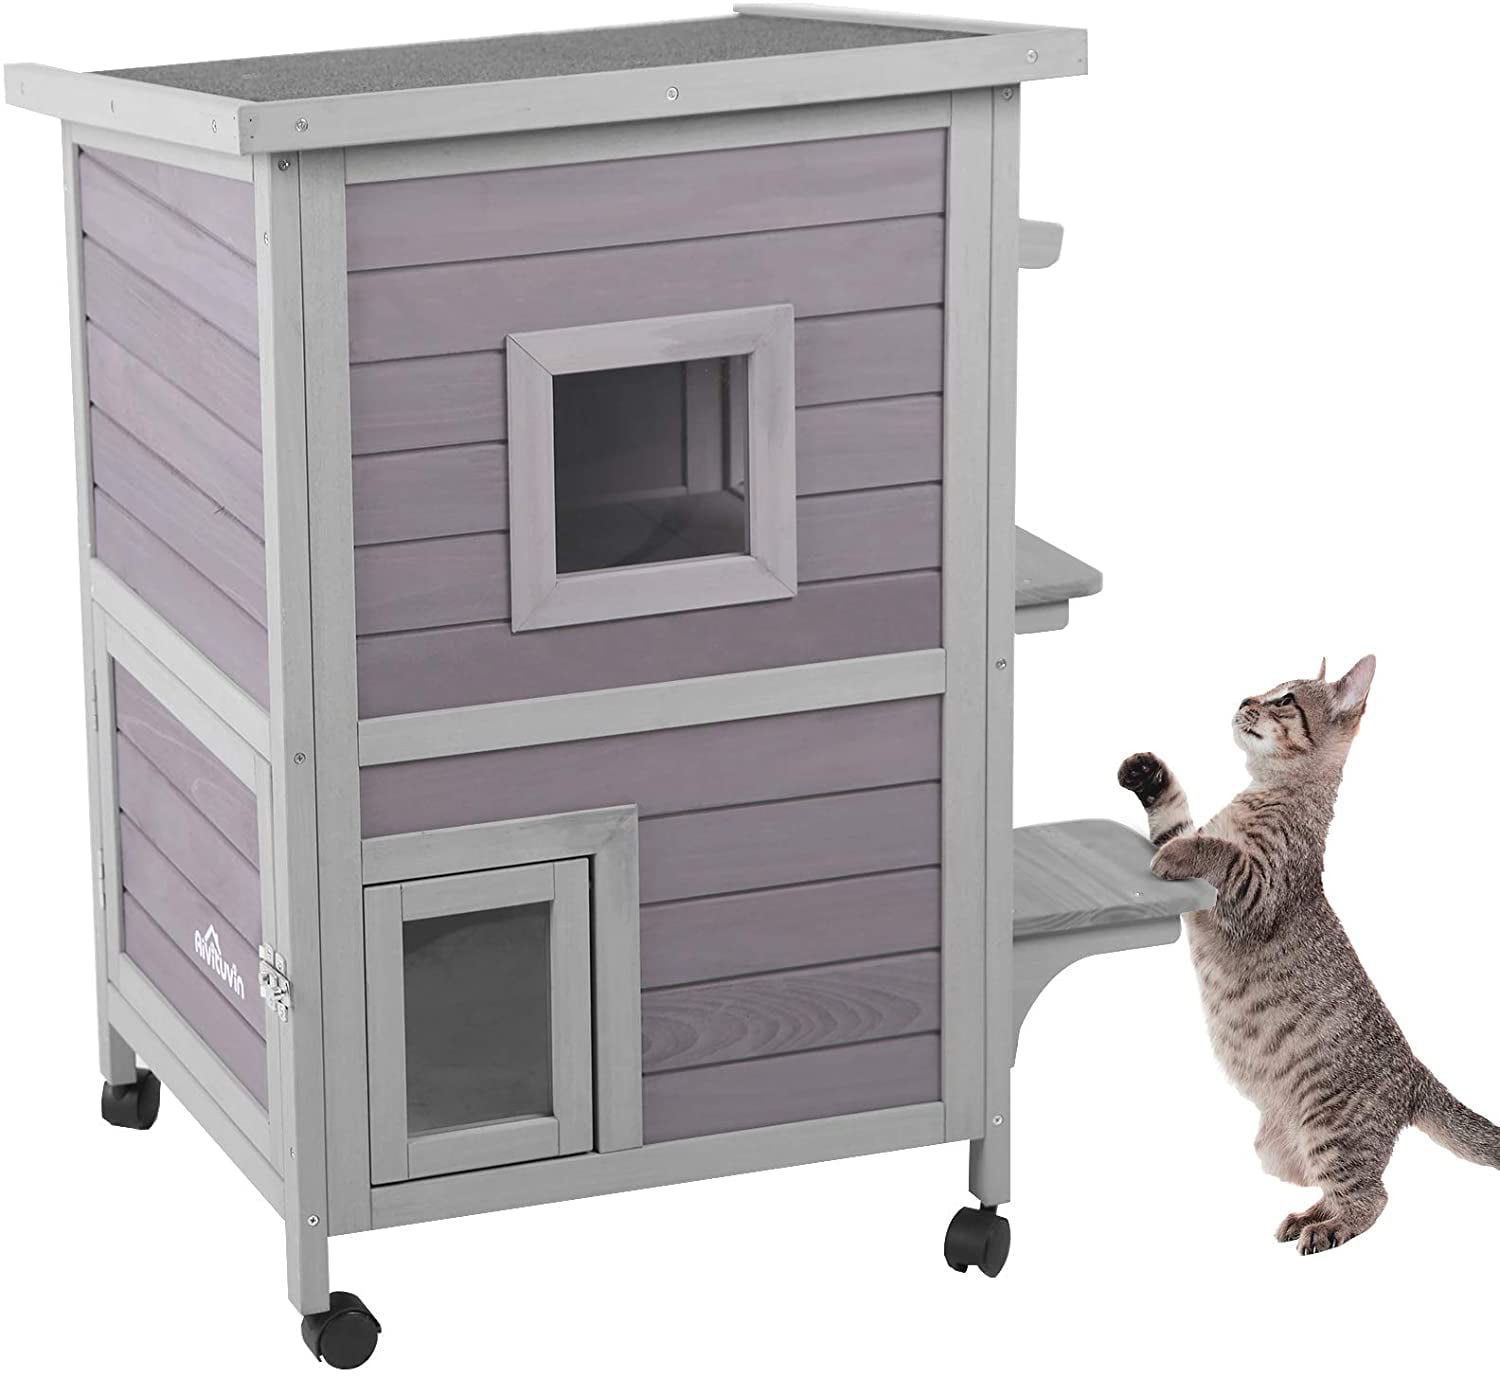 Outdoor Cat House Cat Cube Cat Cabin Pets Cat House Thickened Weatherproof Foldable Cat Dog Tent Cabin Winter Warm Stray Cats Shelter for Outdoor Feral Cat Dog Puppy Kittens